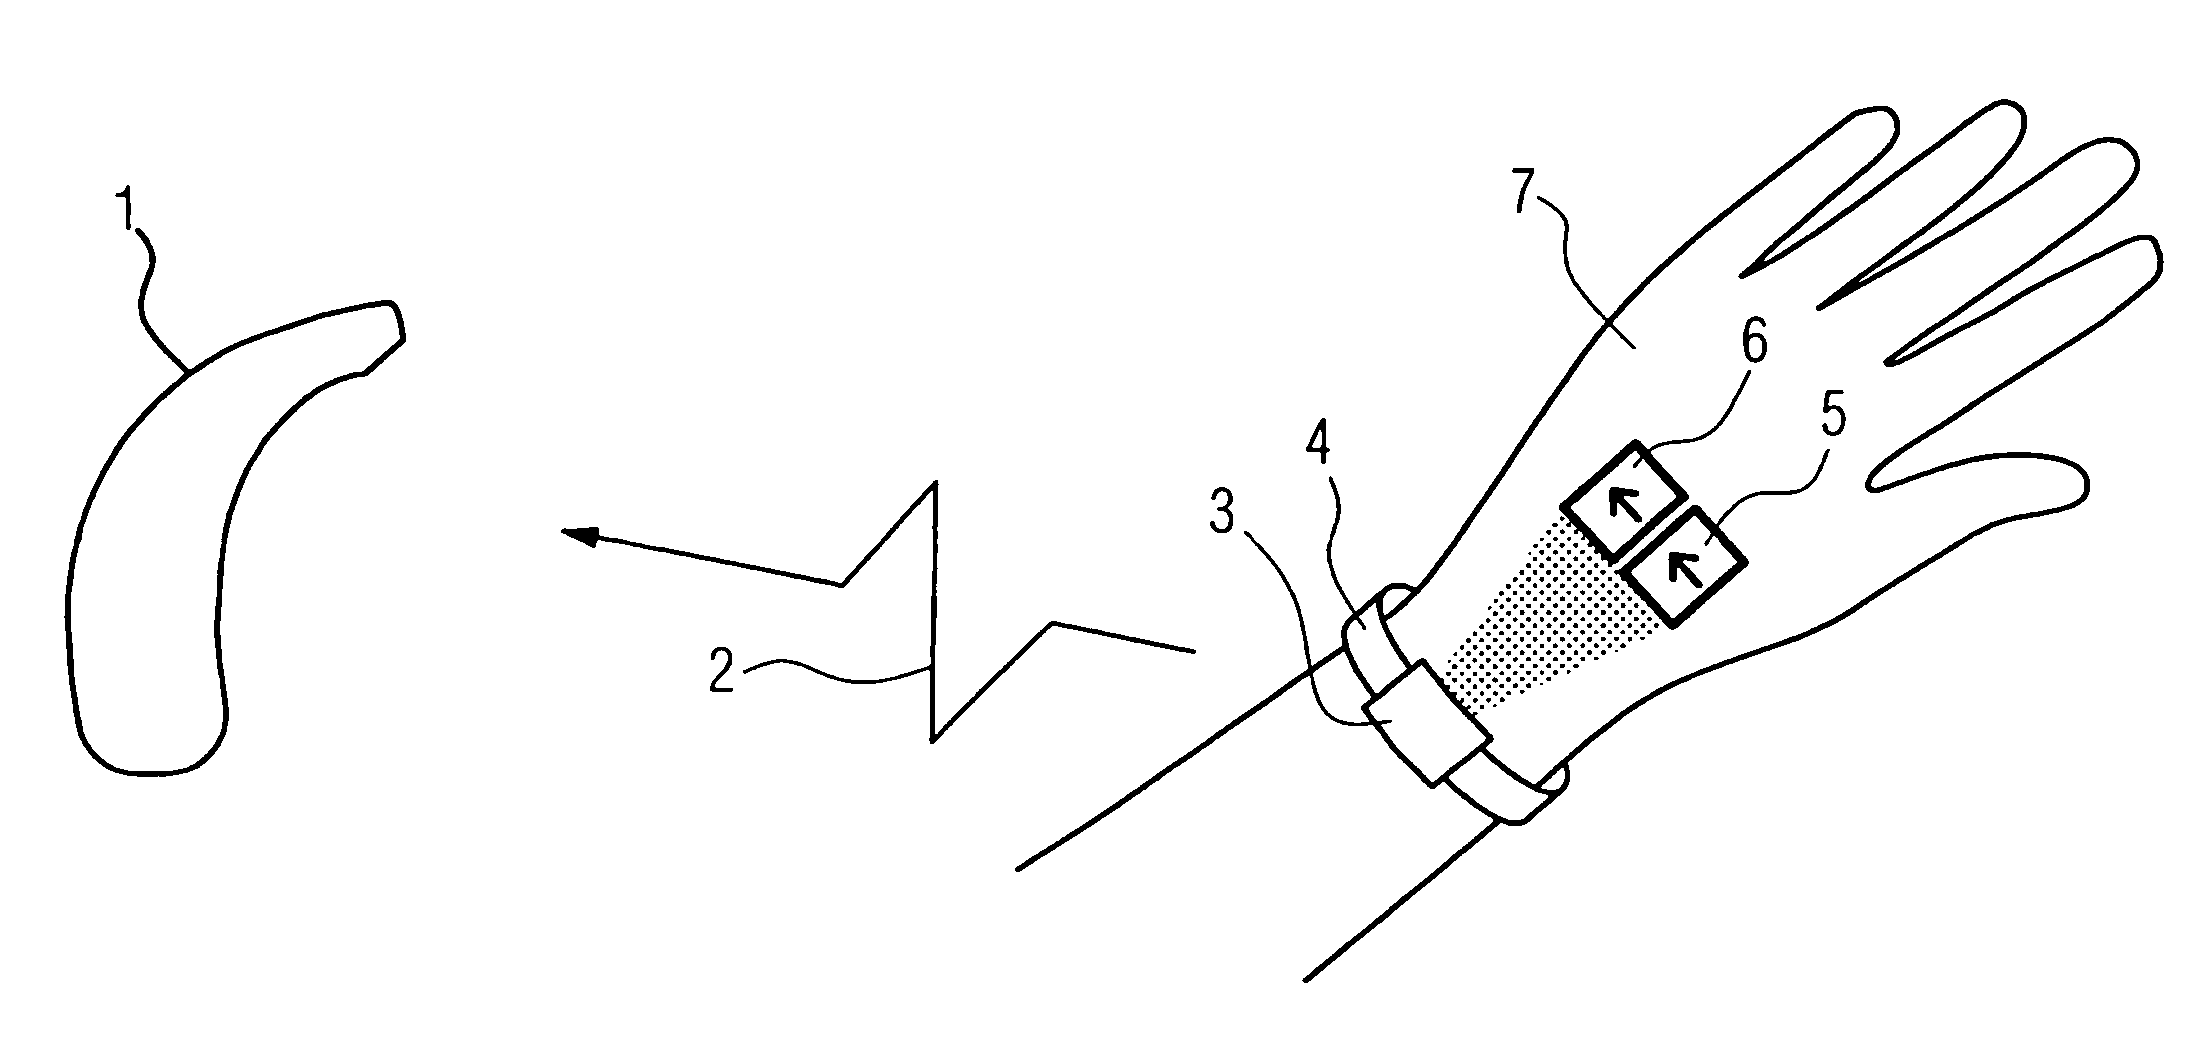 Device and method to remotely operate a hearing device